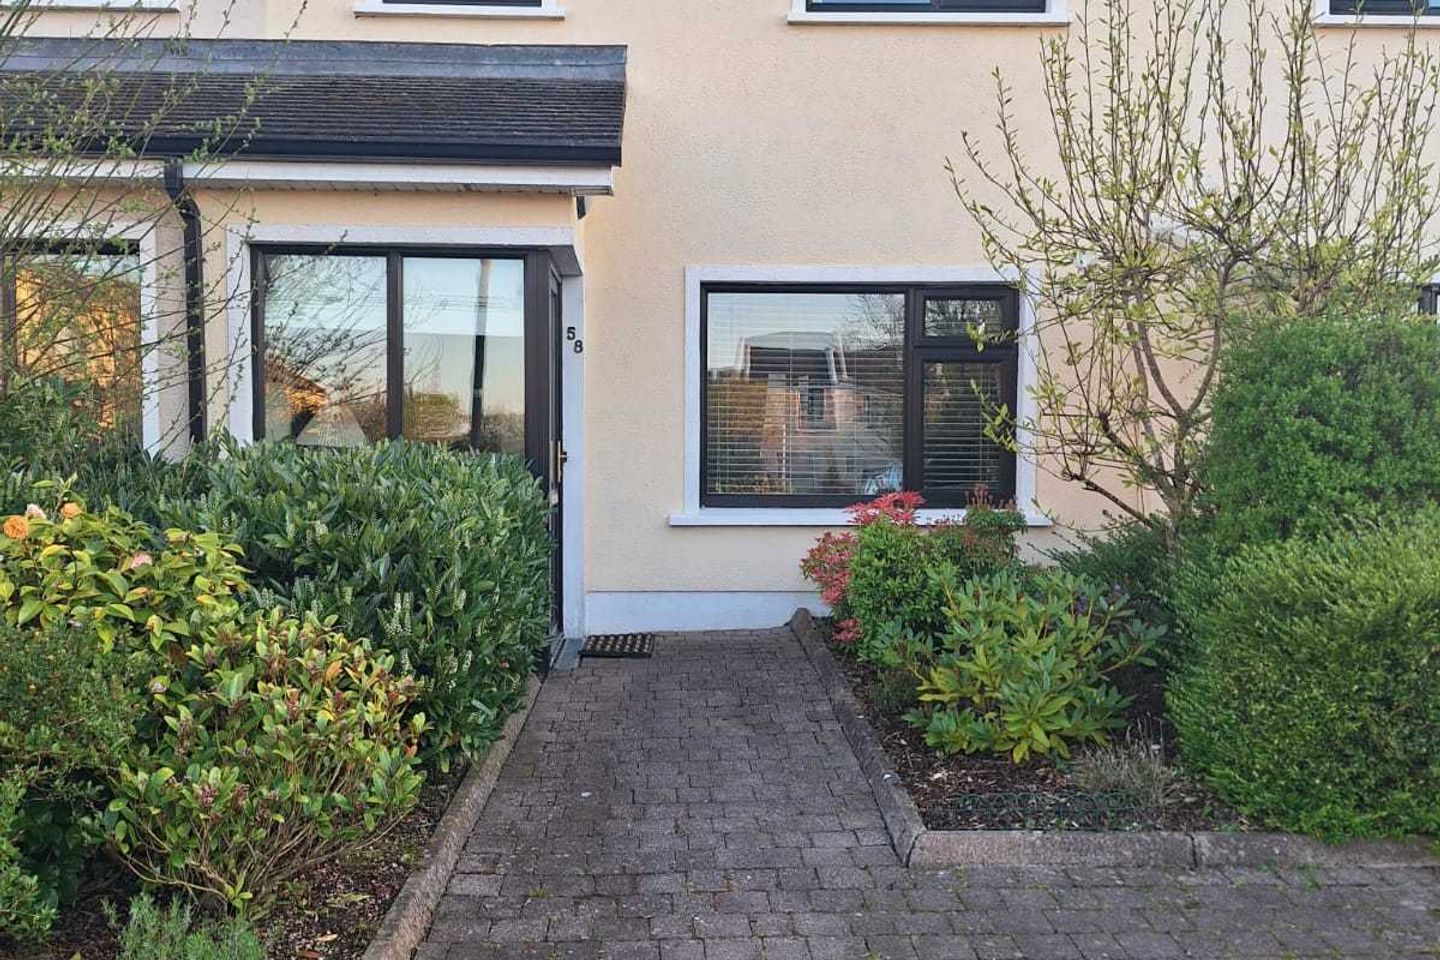 58 Country Meadows, Cloontooa, Tuam, Co. Galway